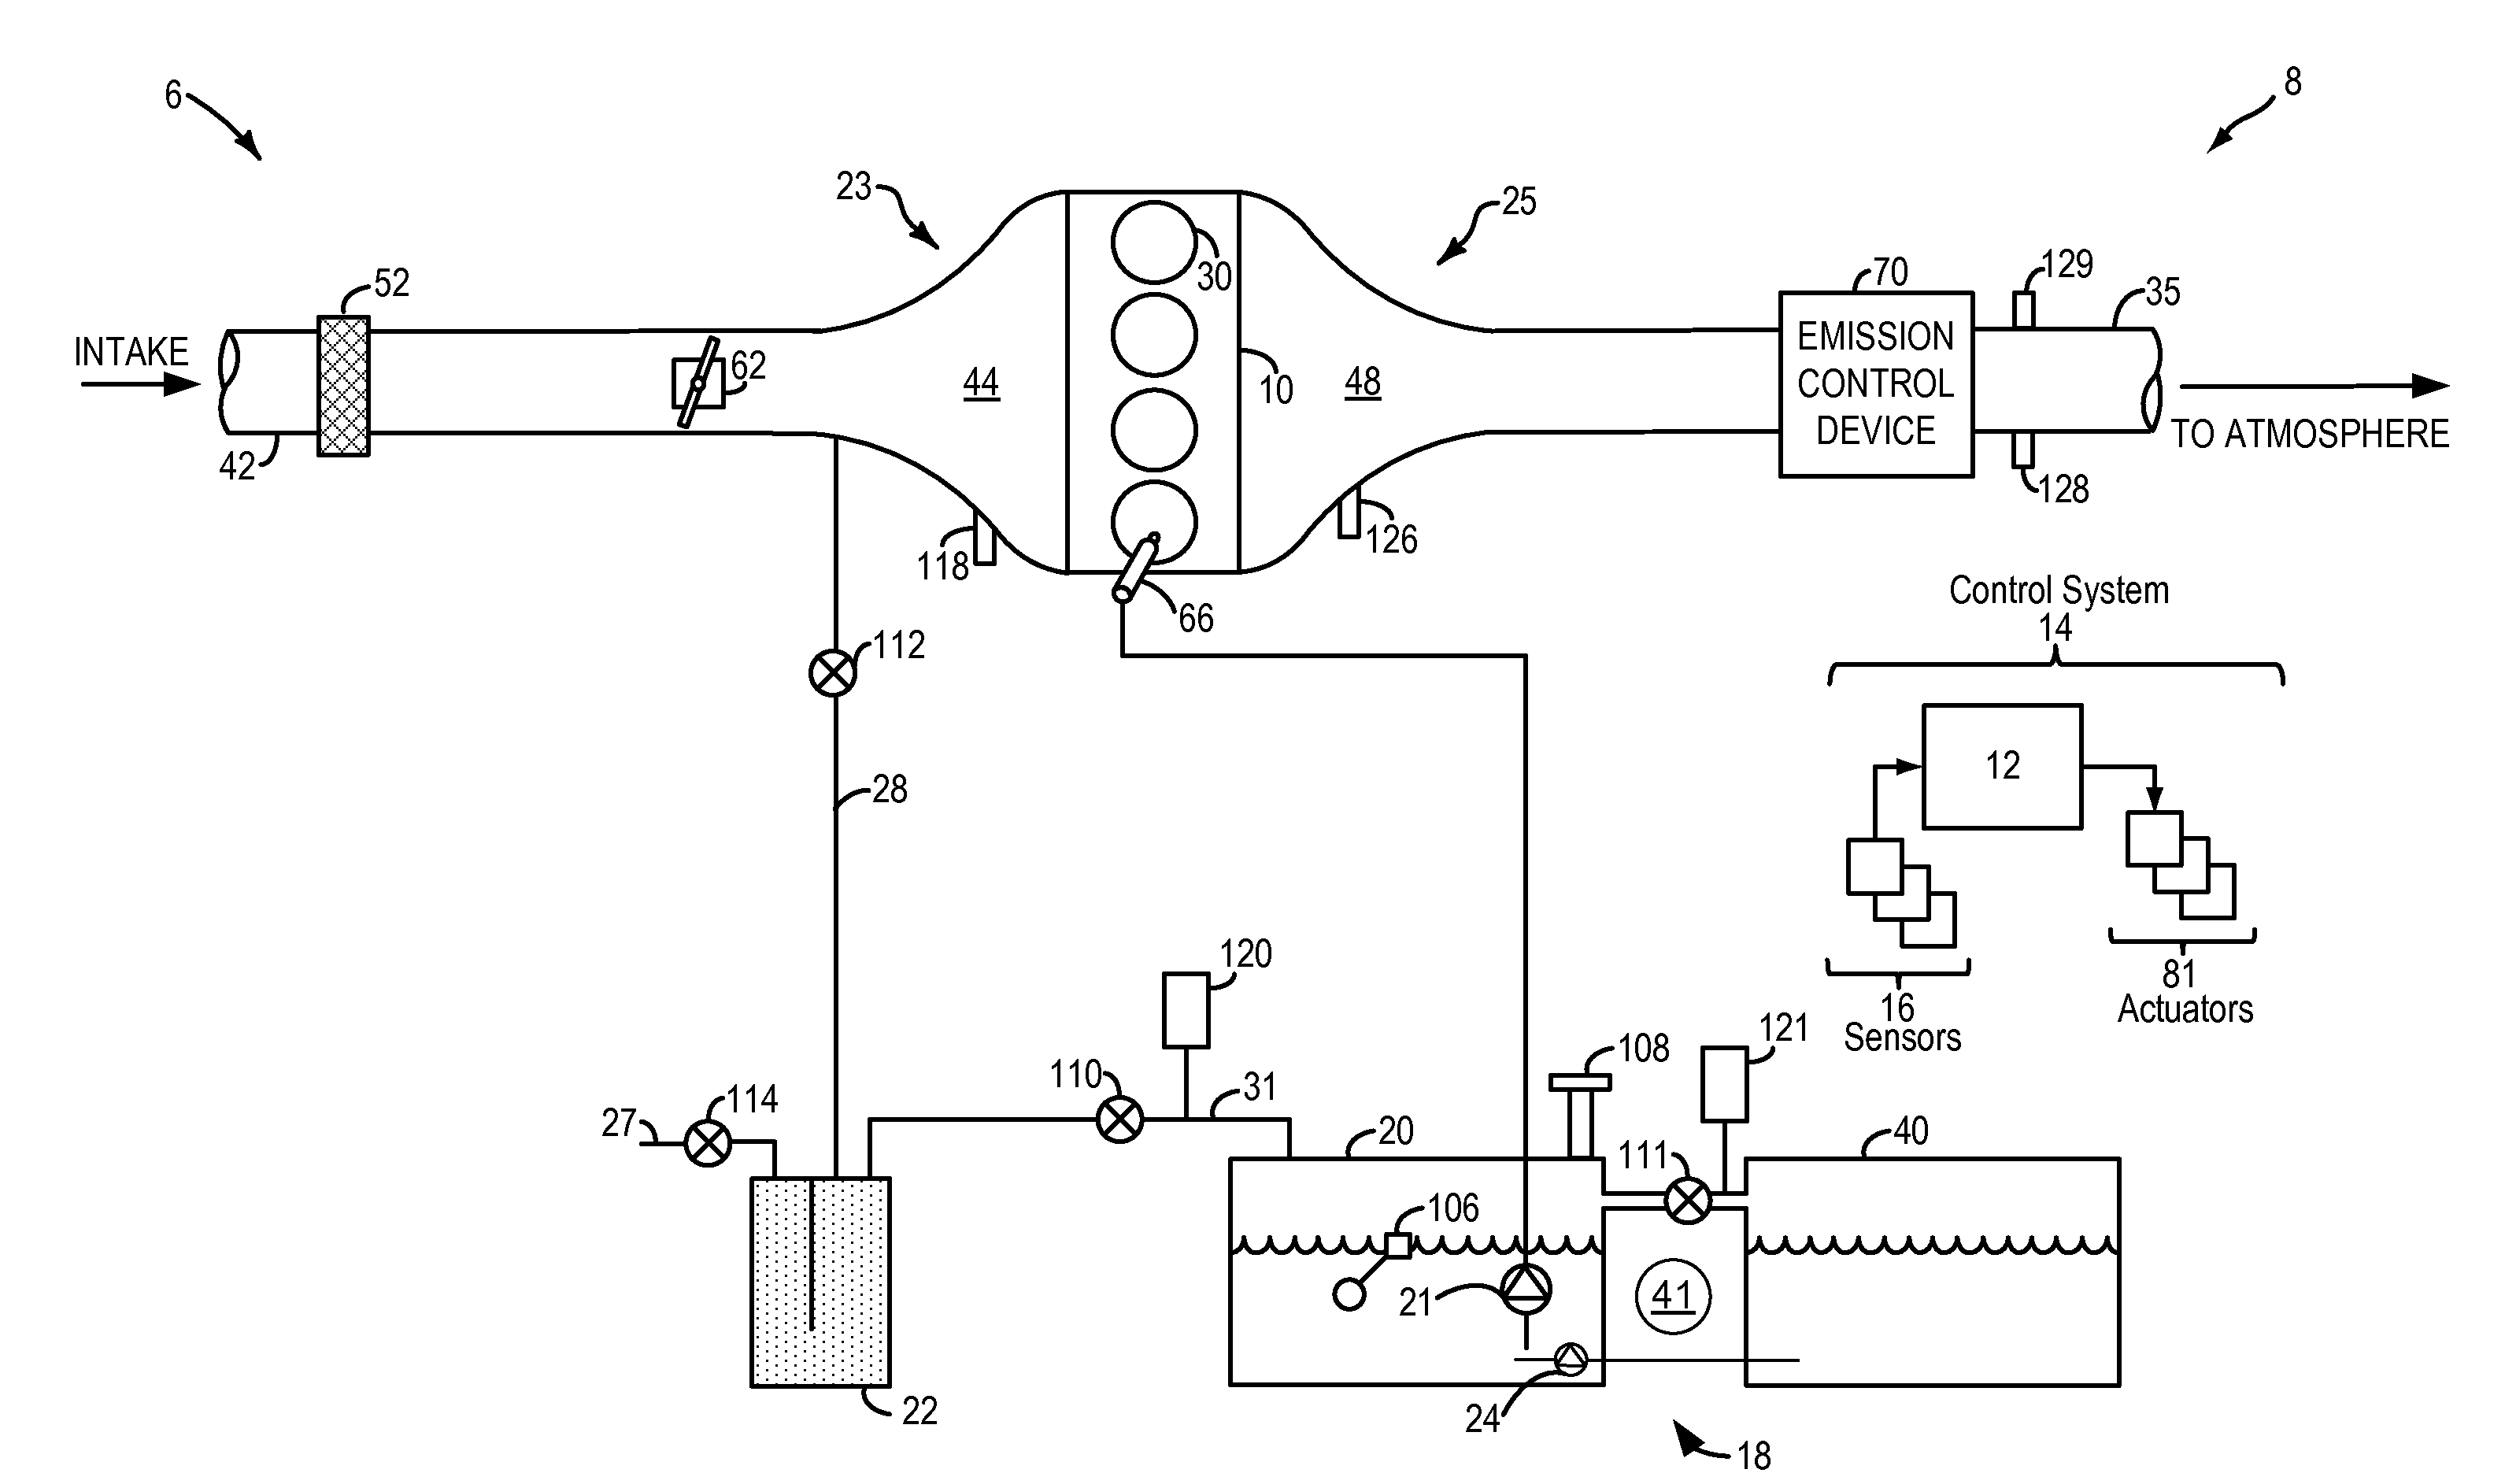 Fuel system degradation test using two fuel tanks